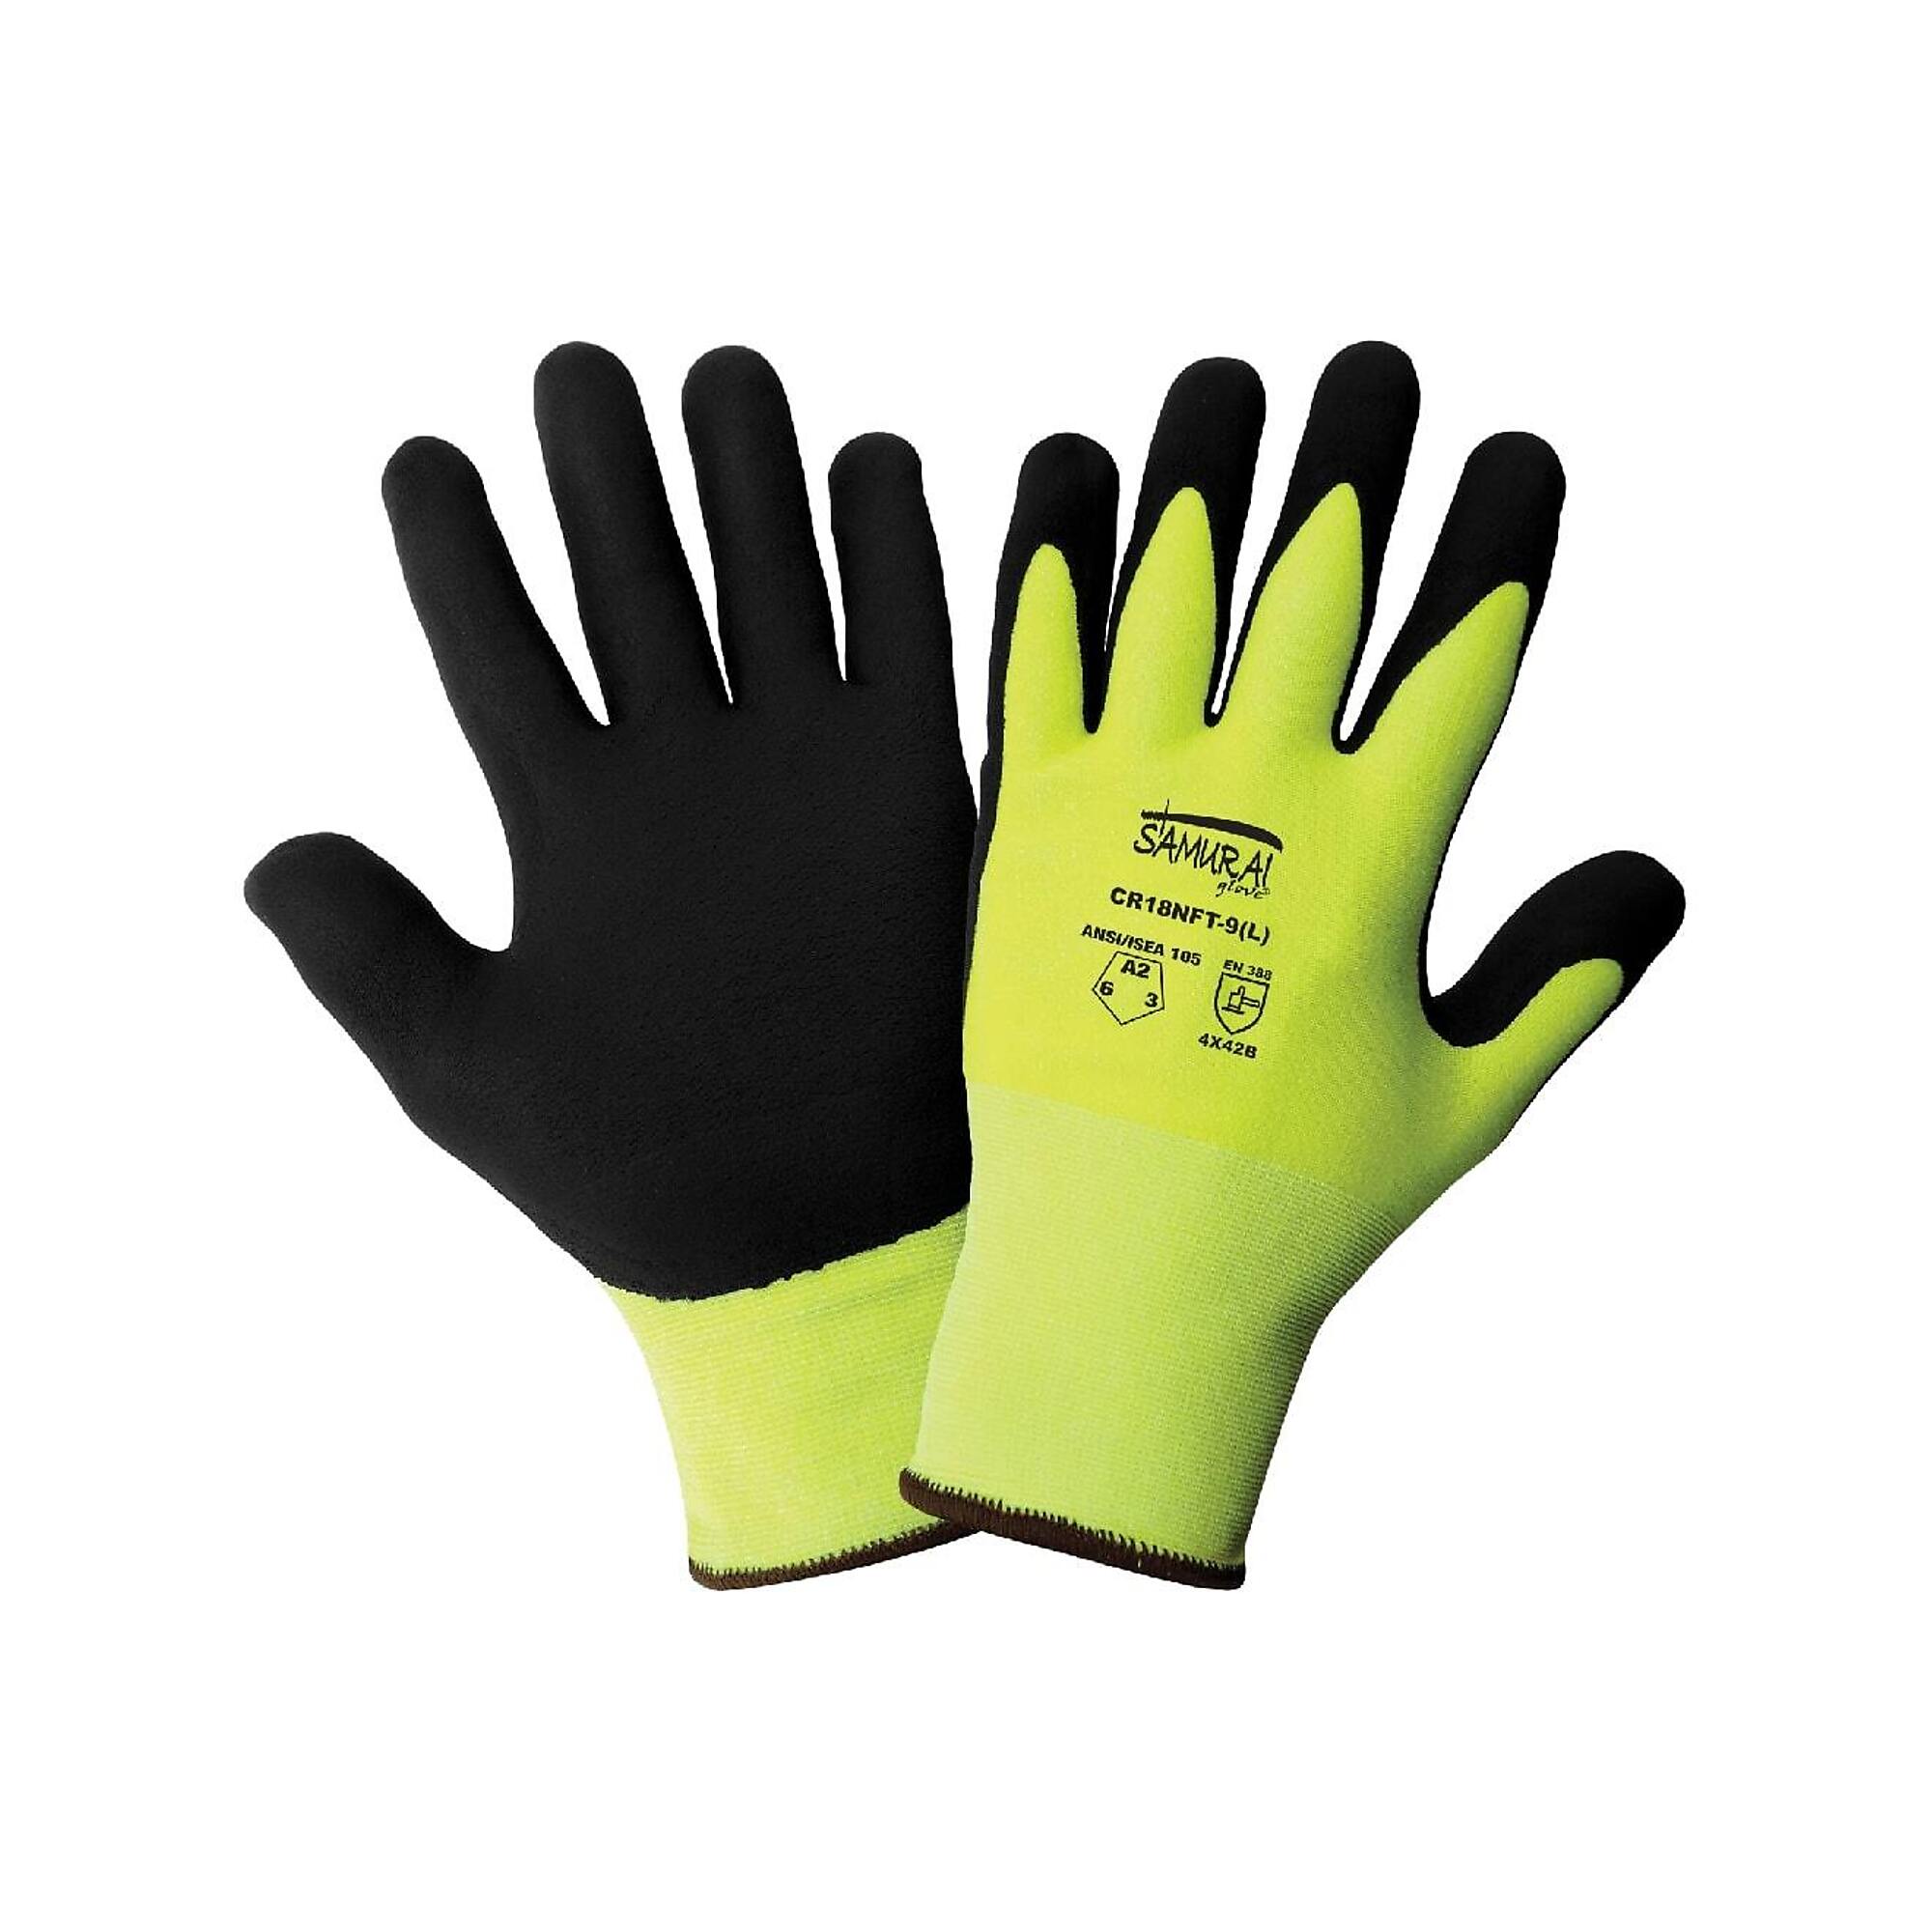 Global Glove HV Cut A2 and Puncture Resistant Gloves - 12 Pairs